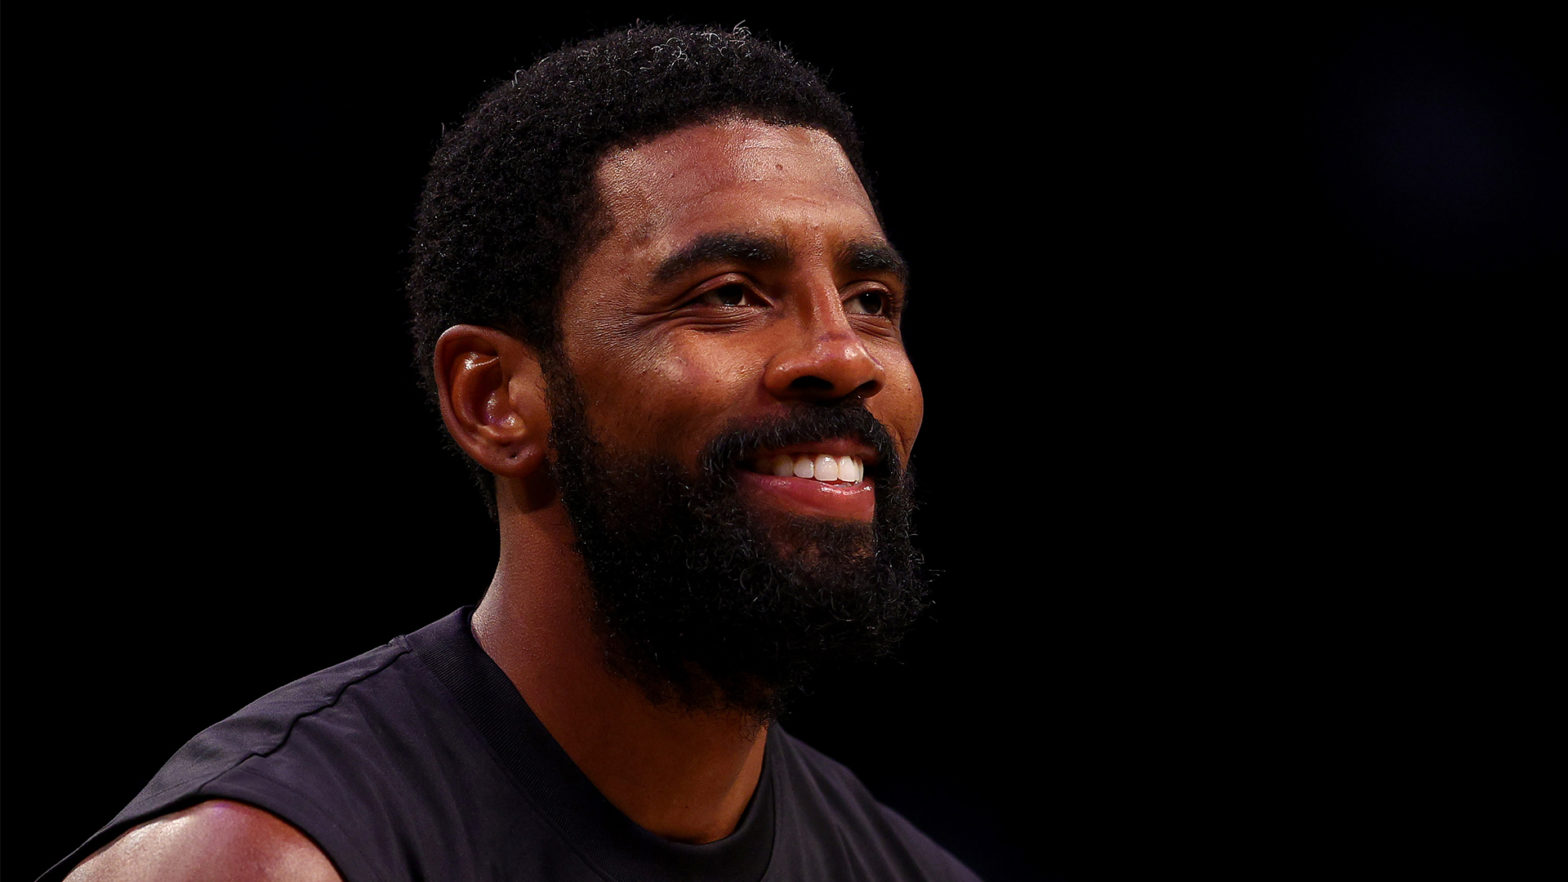 HBCU Student Exceeds $6K GoFundMe Goal To Continue Her Studies After Kyrie Irving Donates $22K